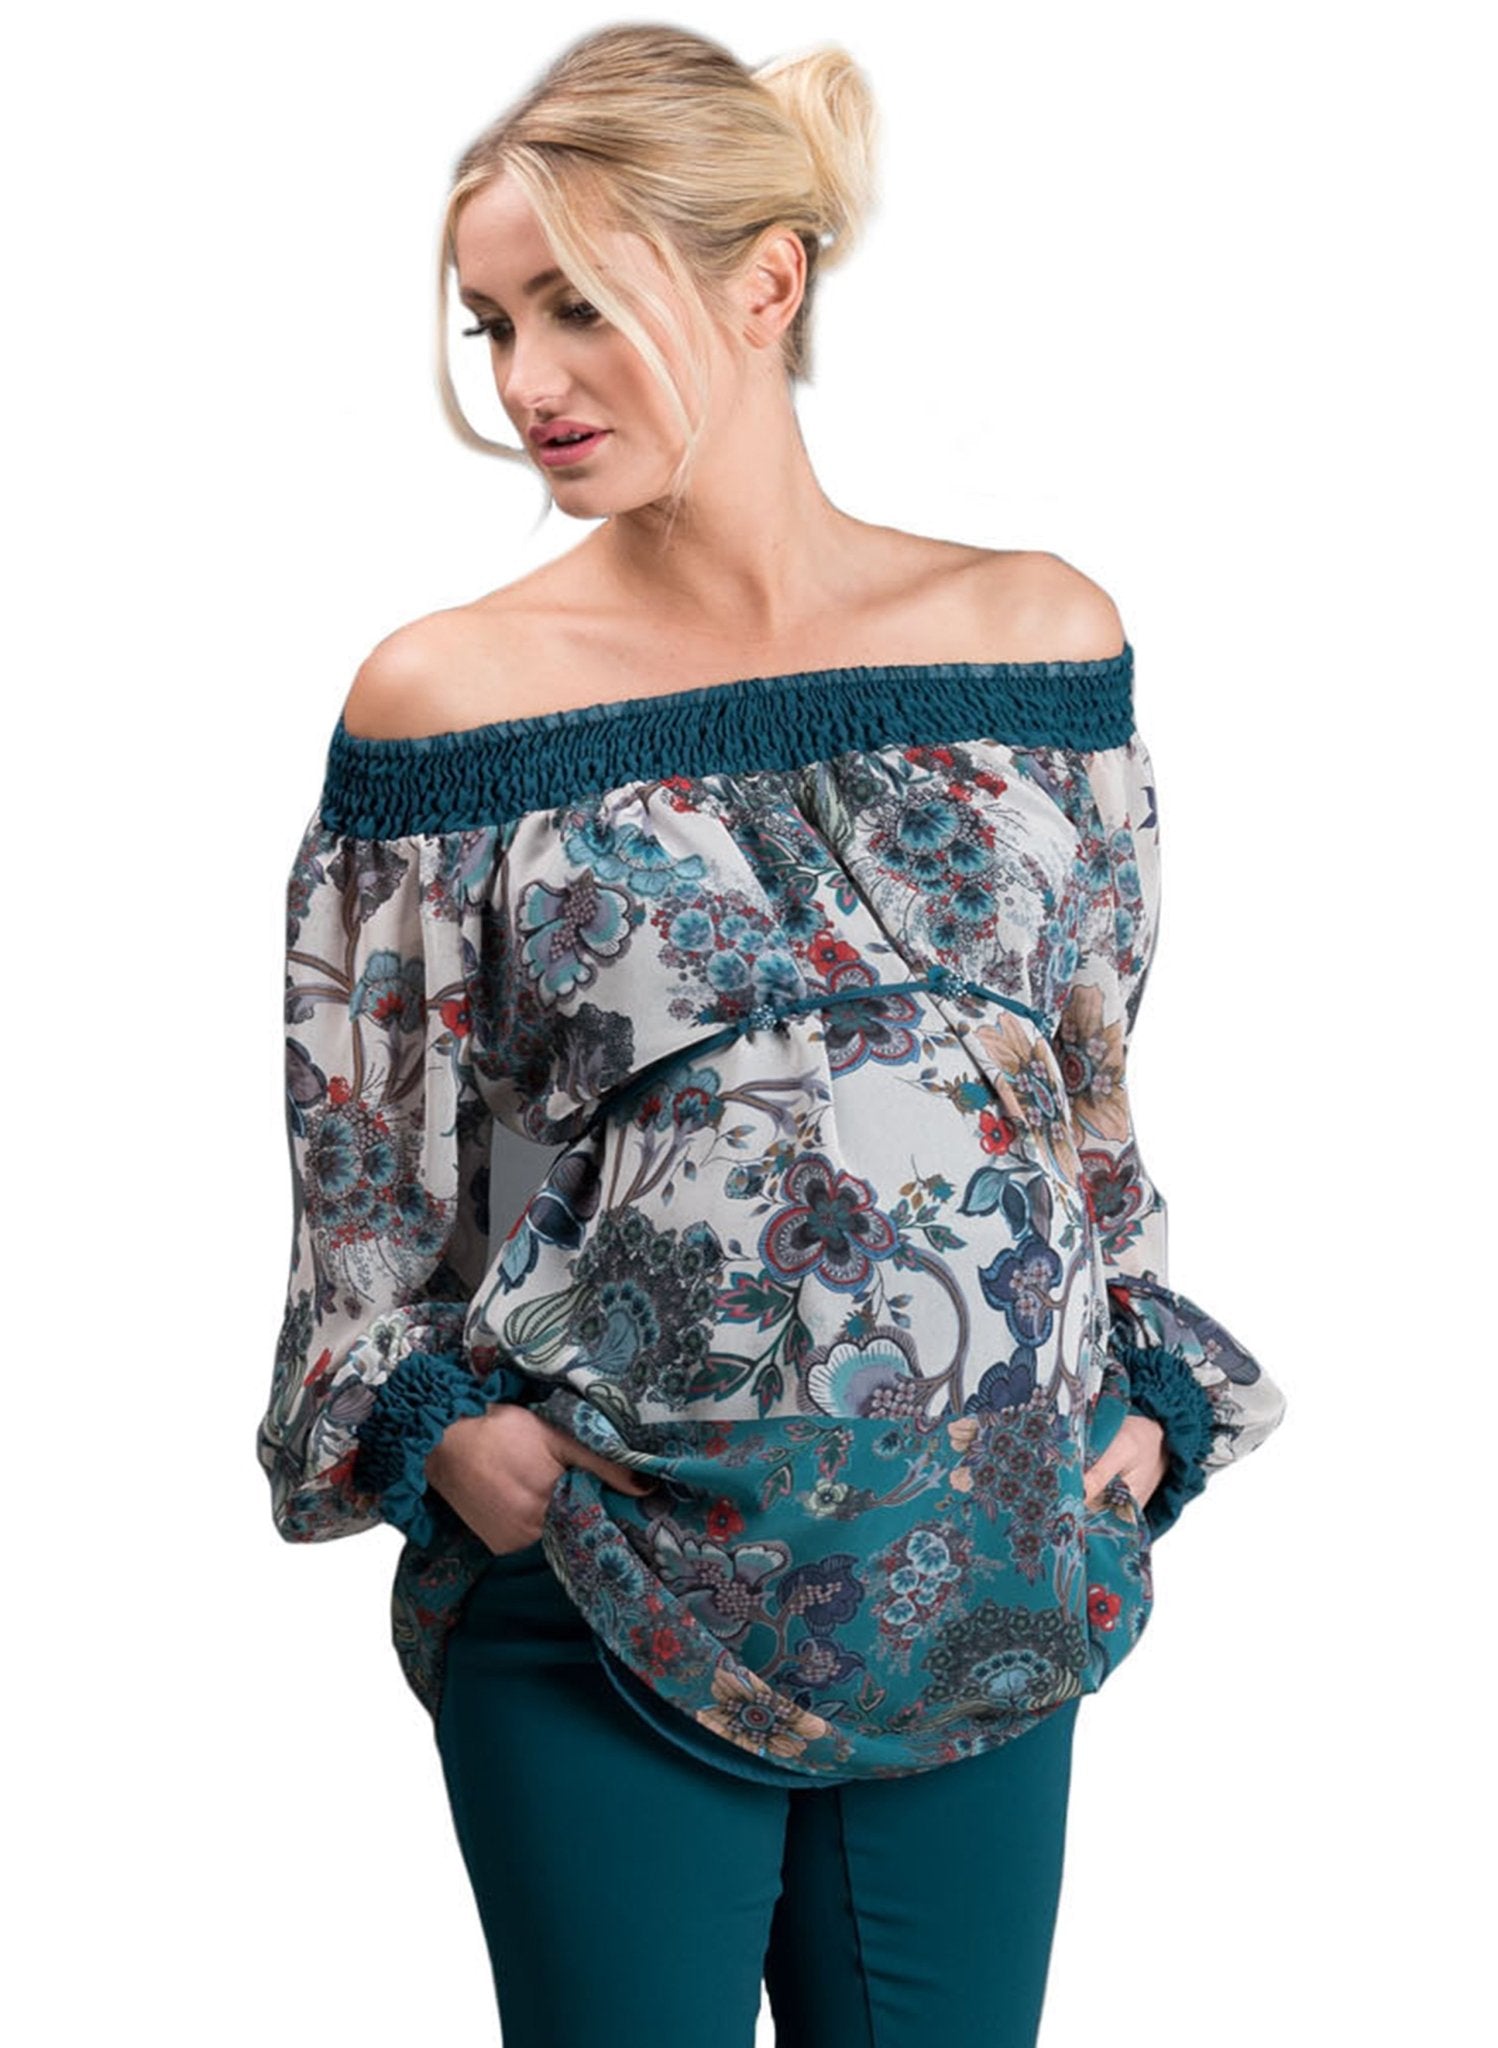 Floral Print Maternity Tunic - Mums and Bumps